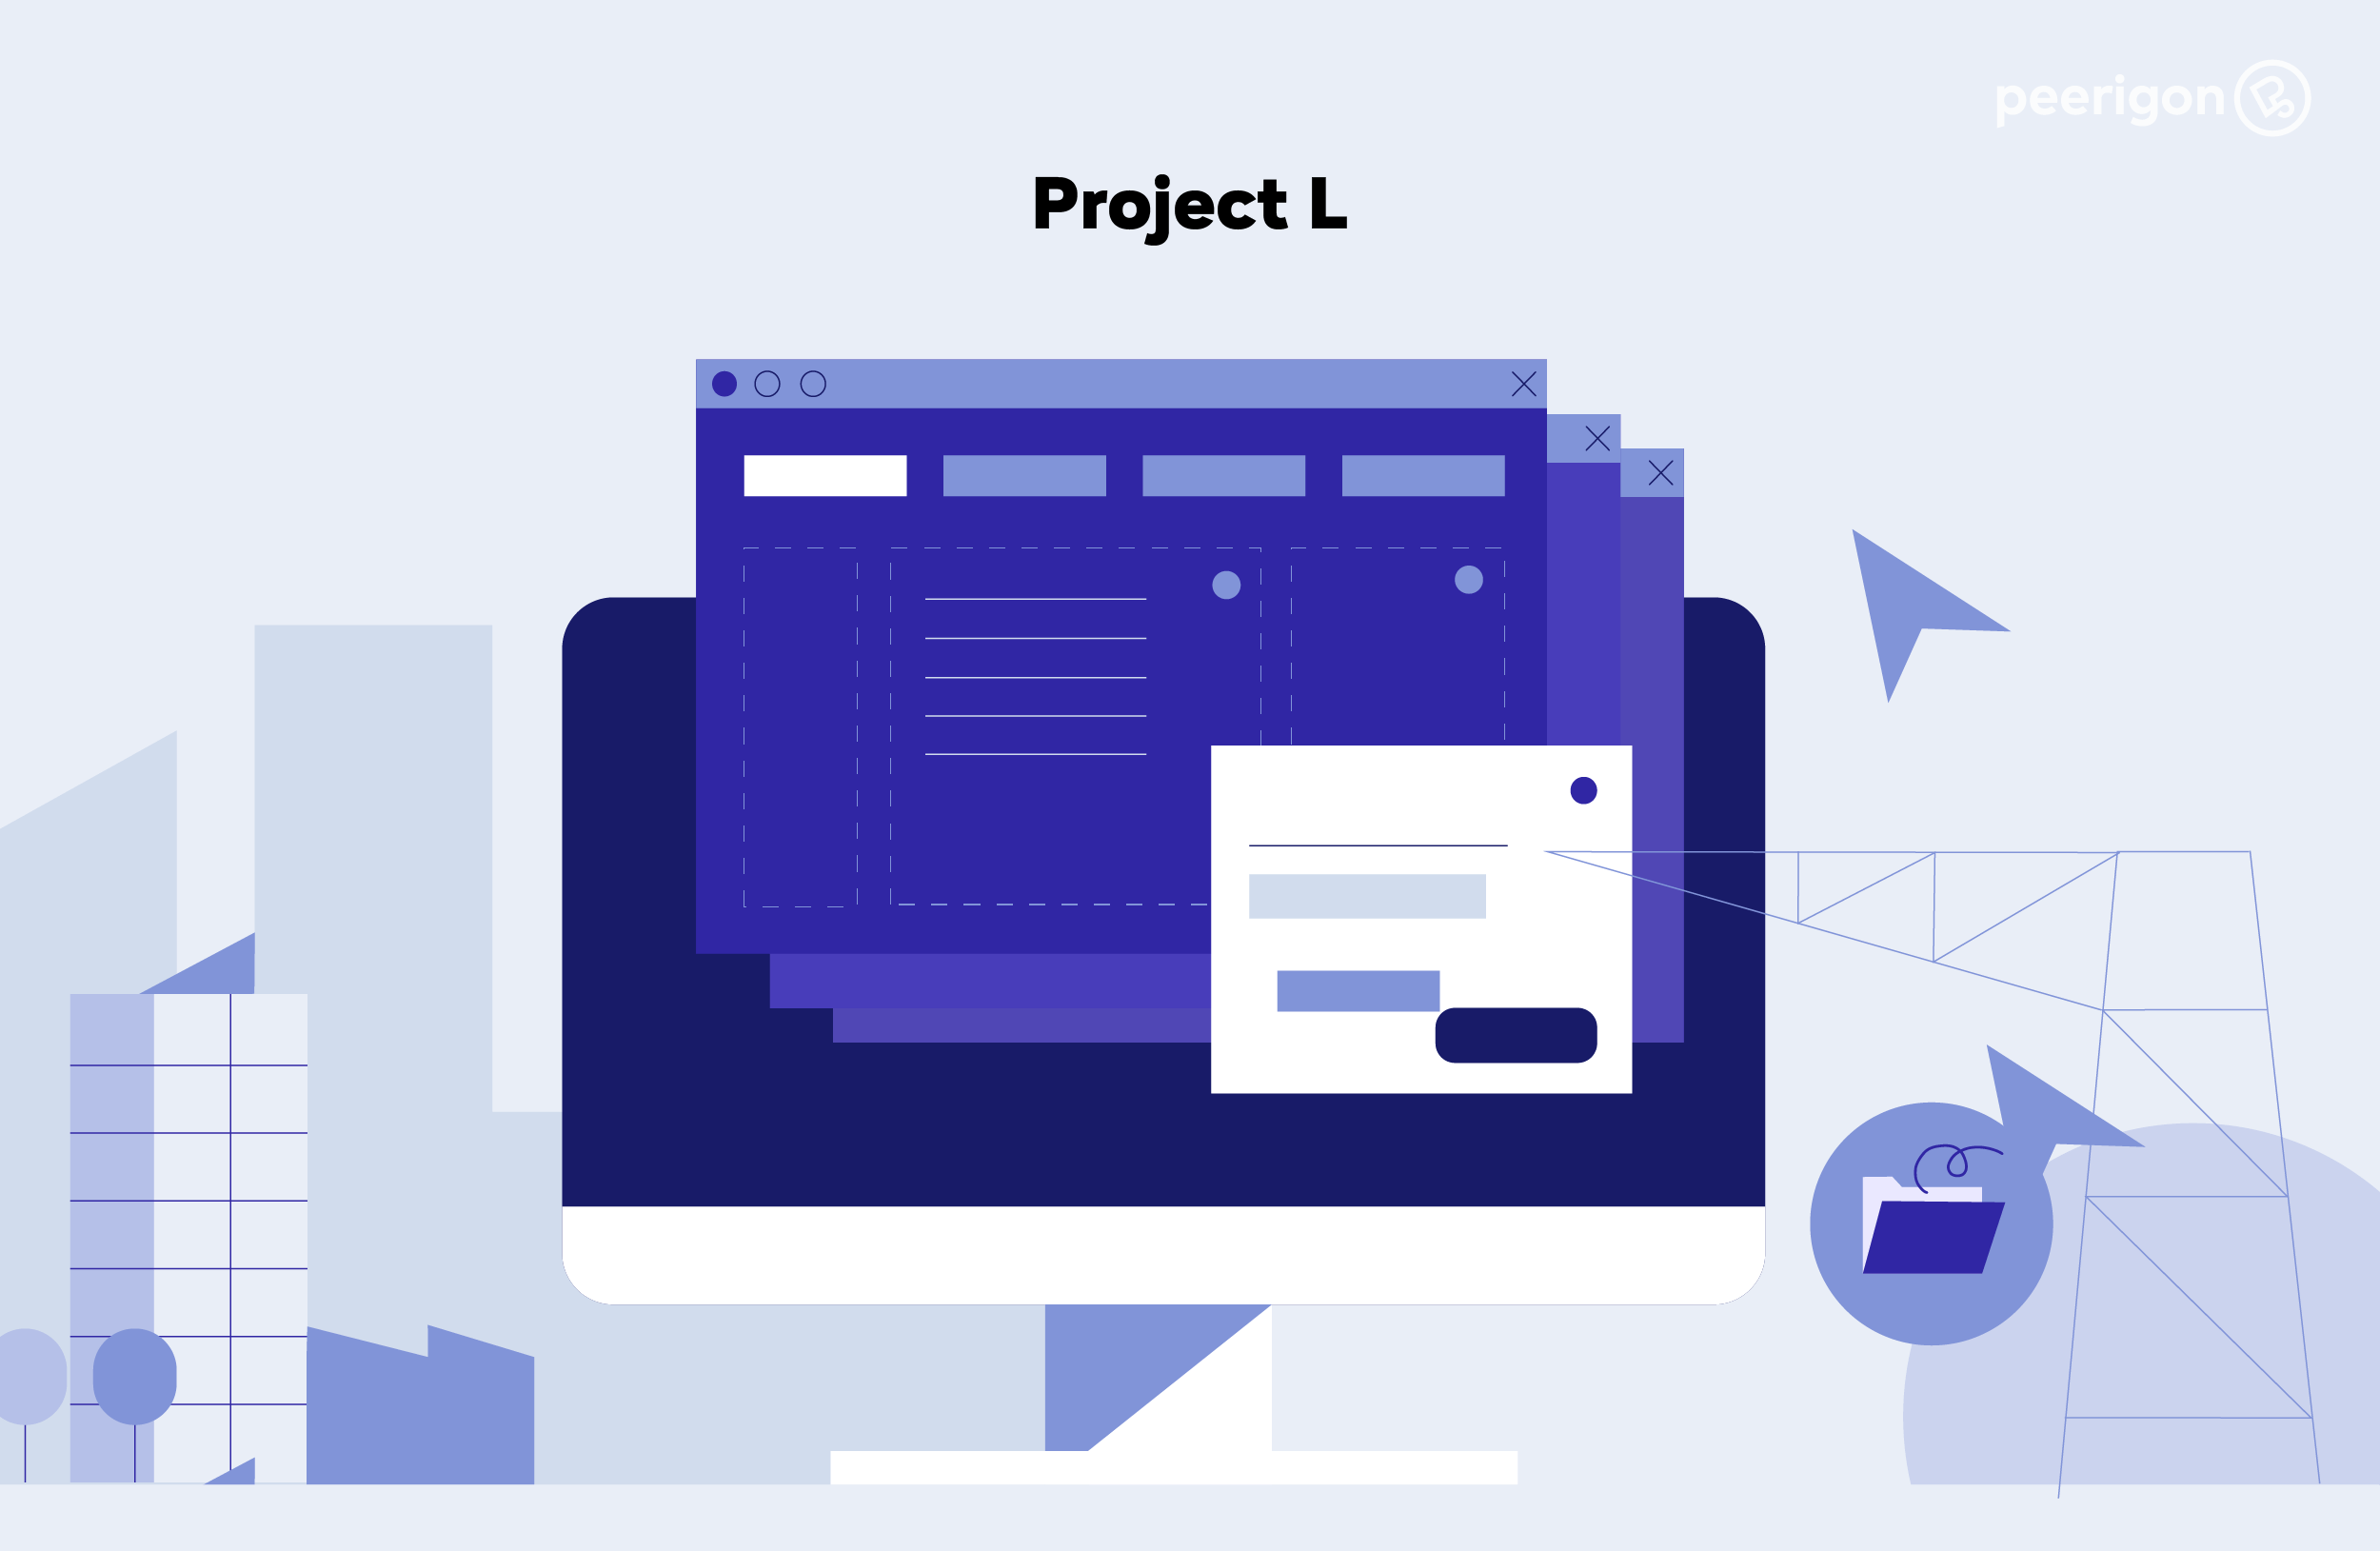 App example with a bigger feature scope: Project "L"